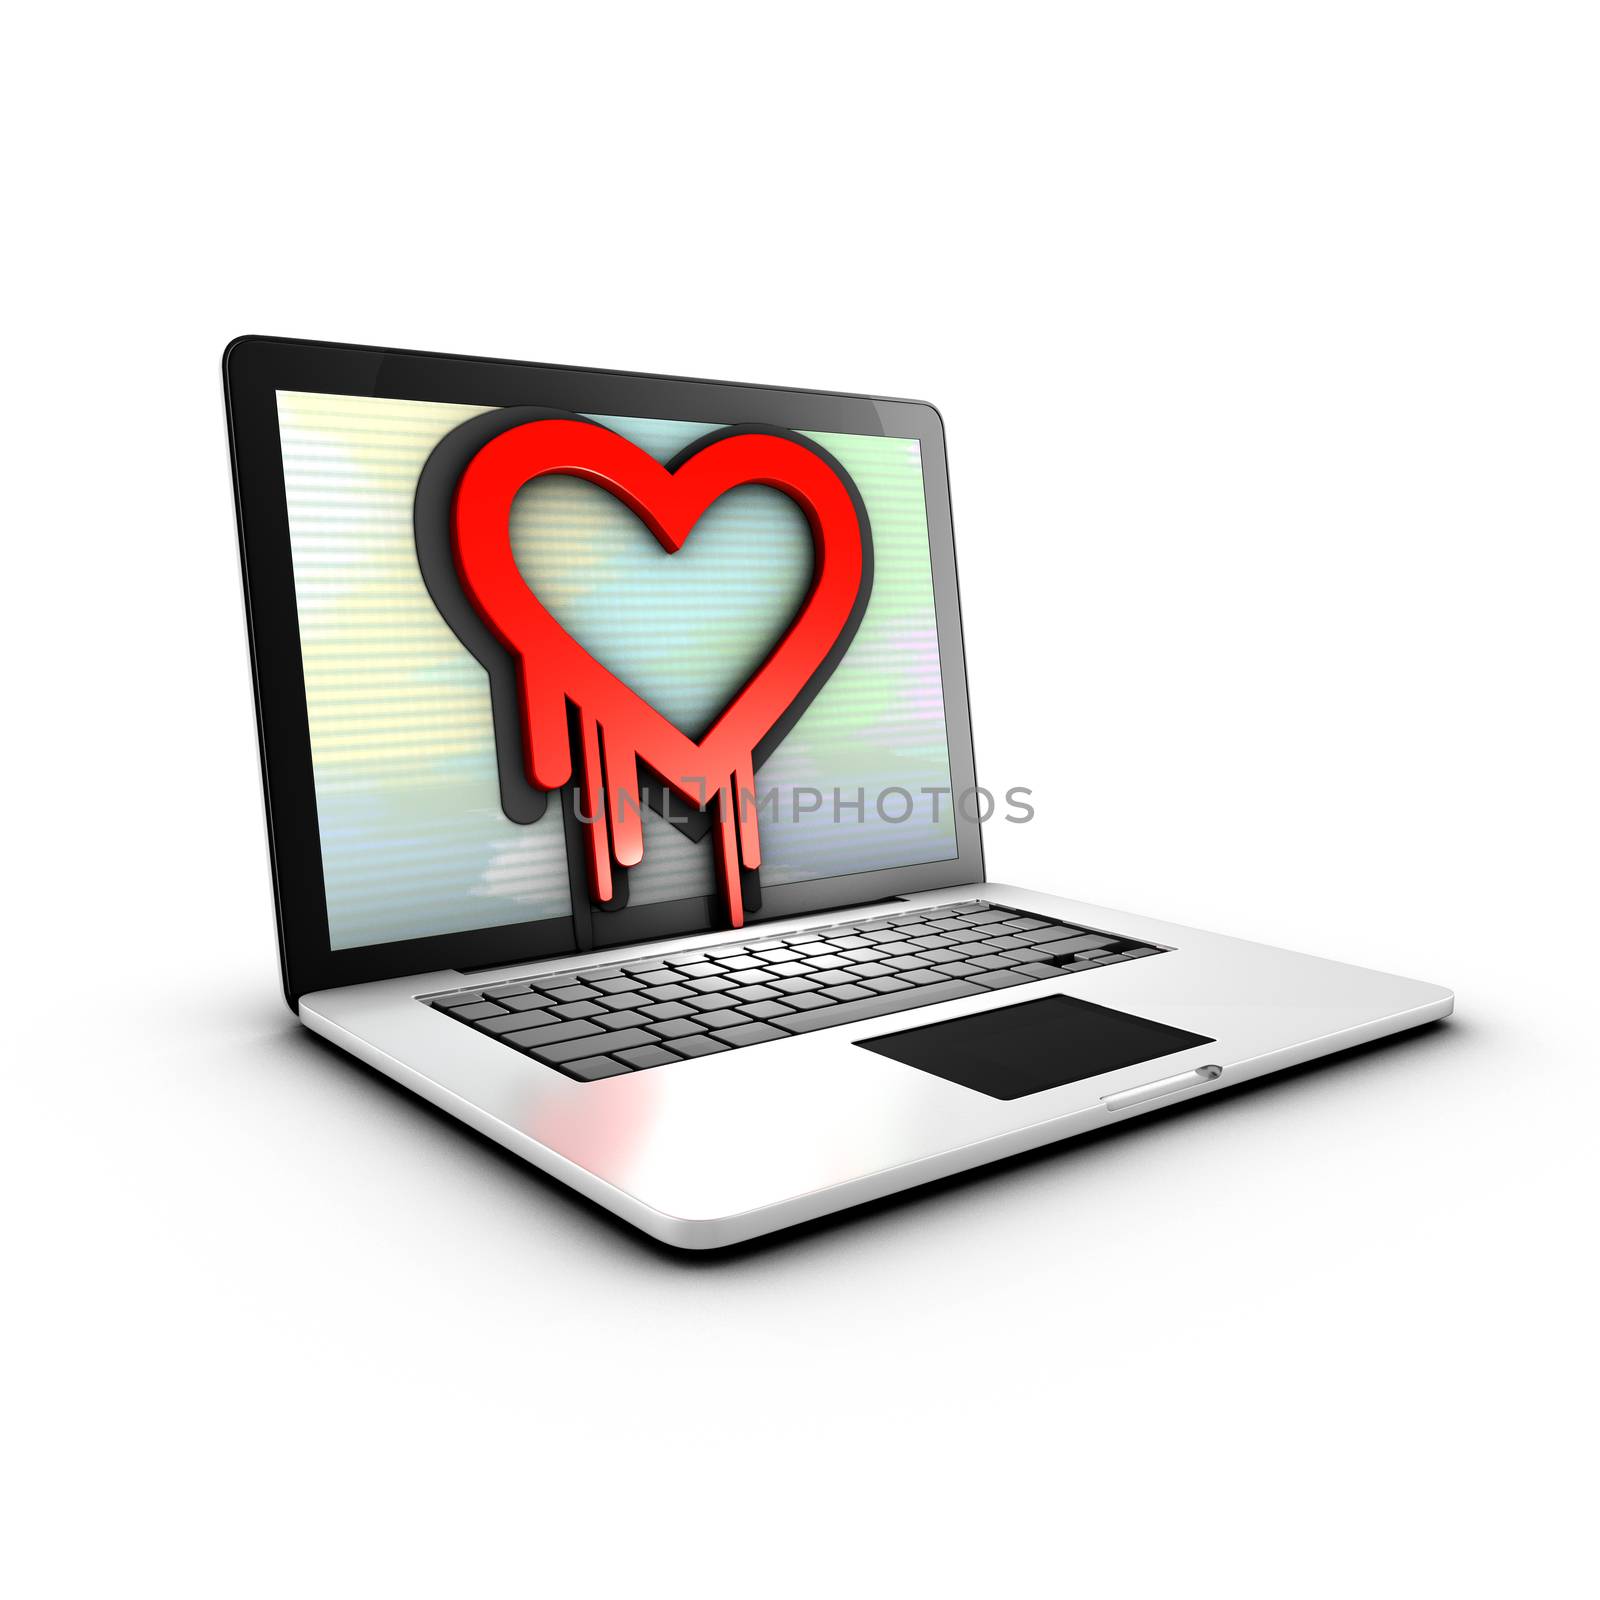 The Heartbleed Bug is a vulnerability in cryptographic software library